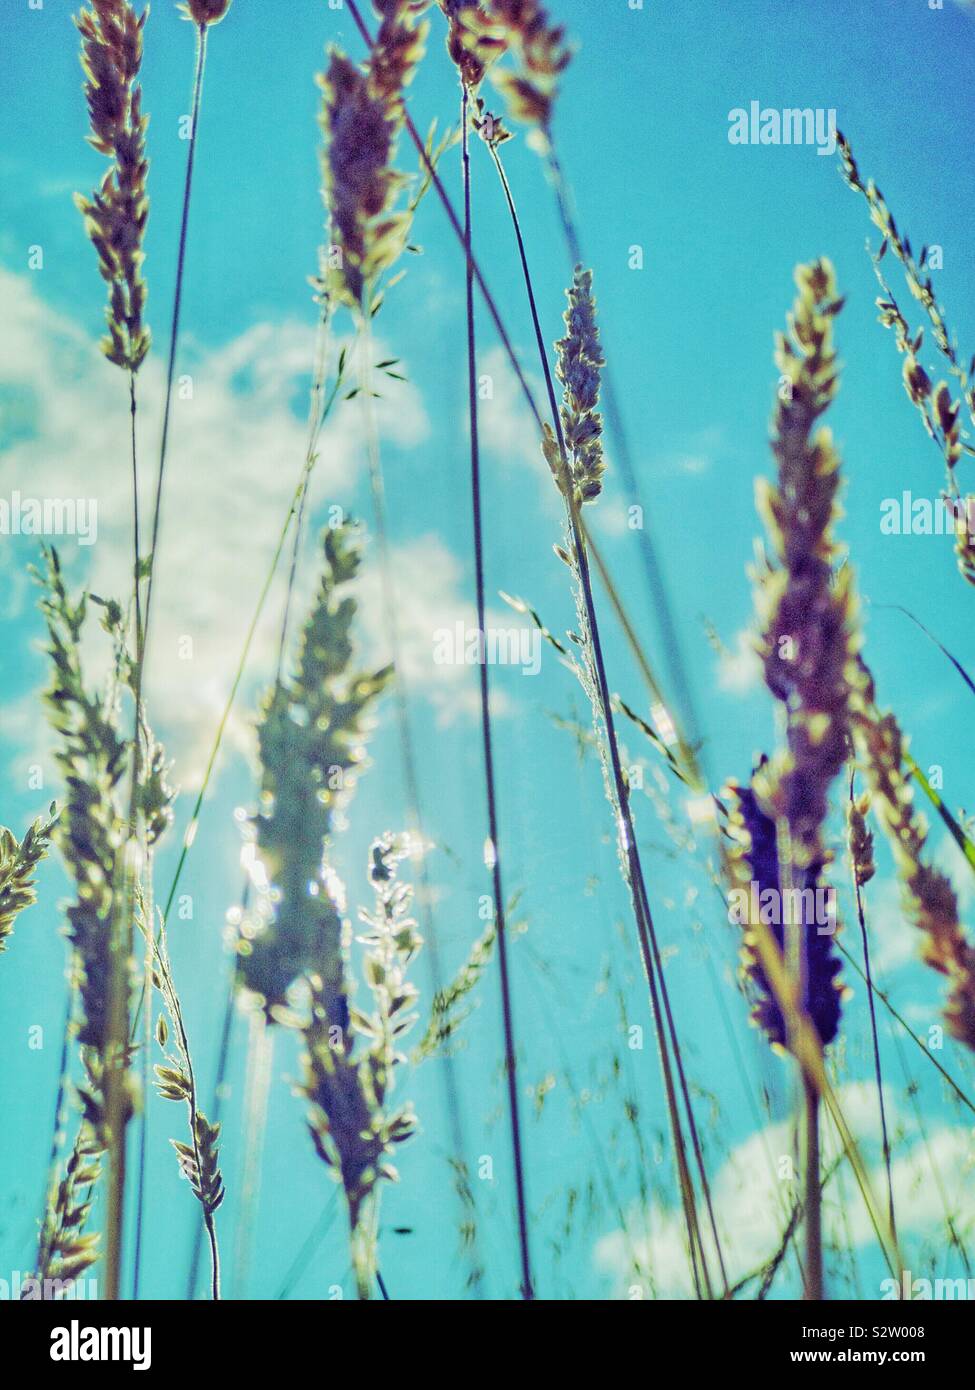 Grass seed heads against a blue sky. Stock Photo